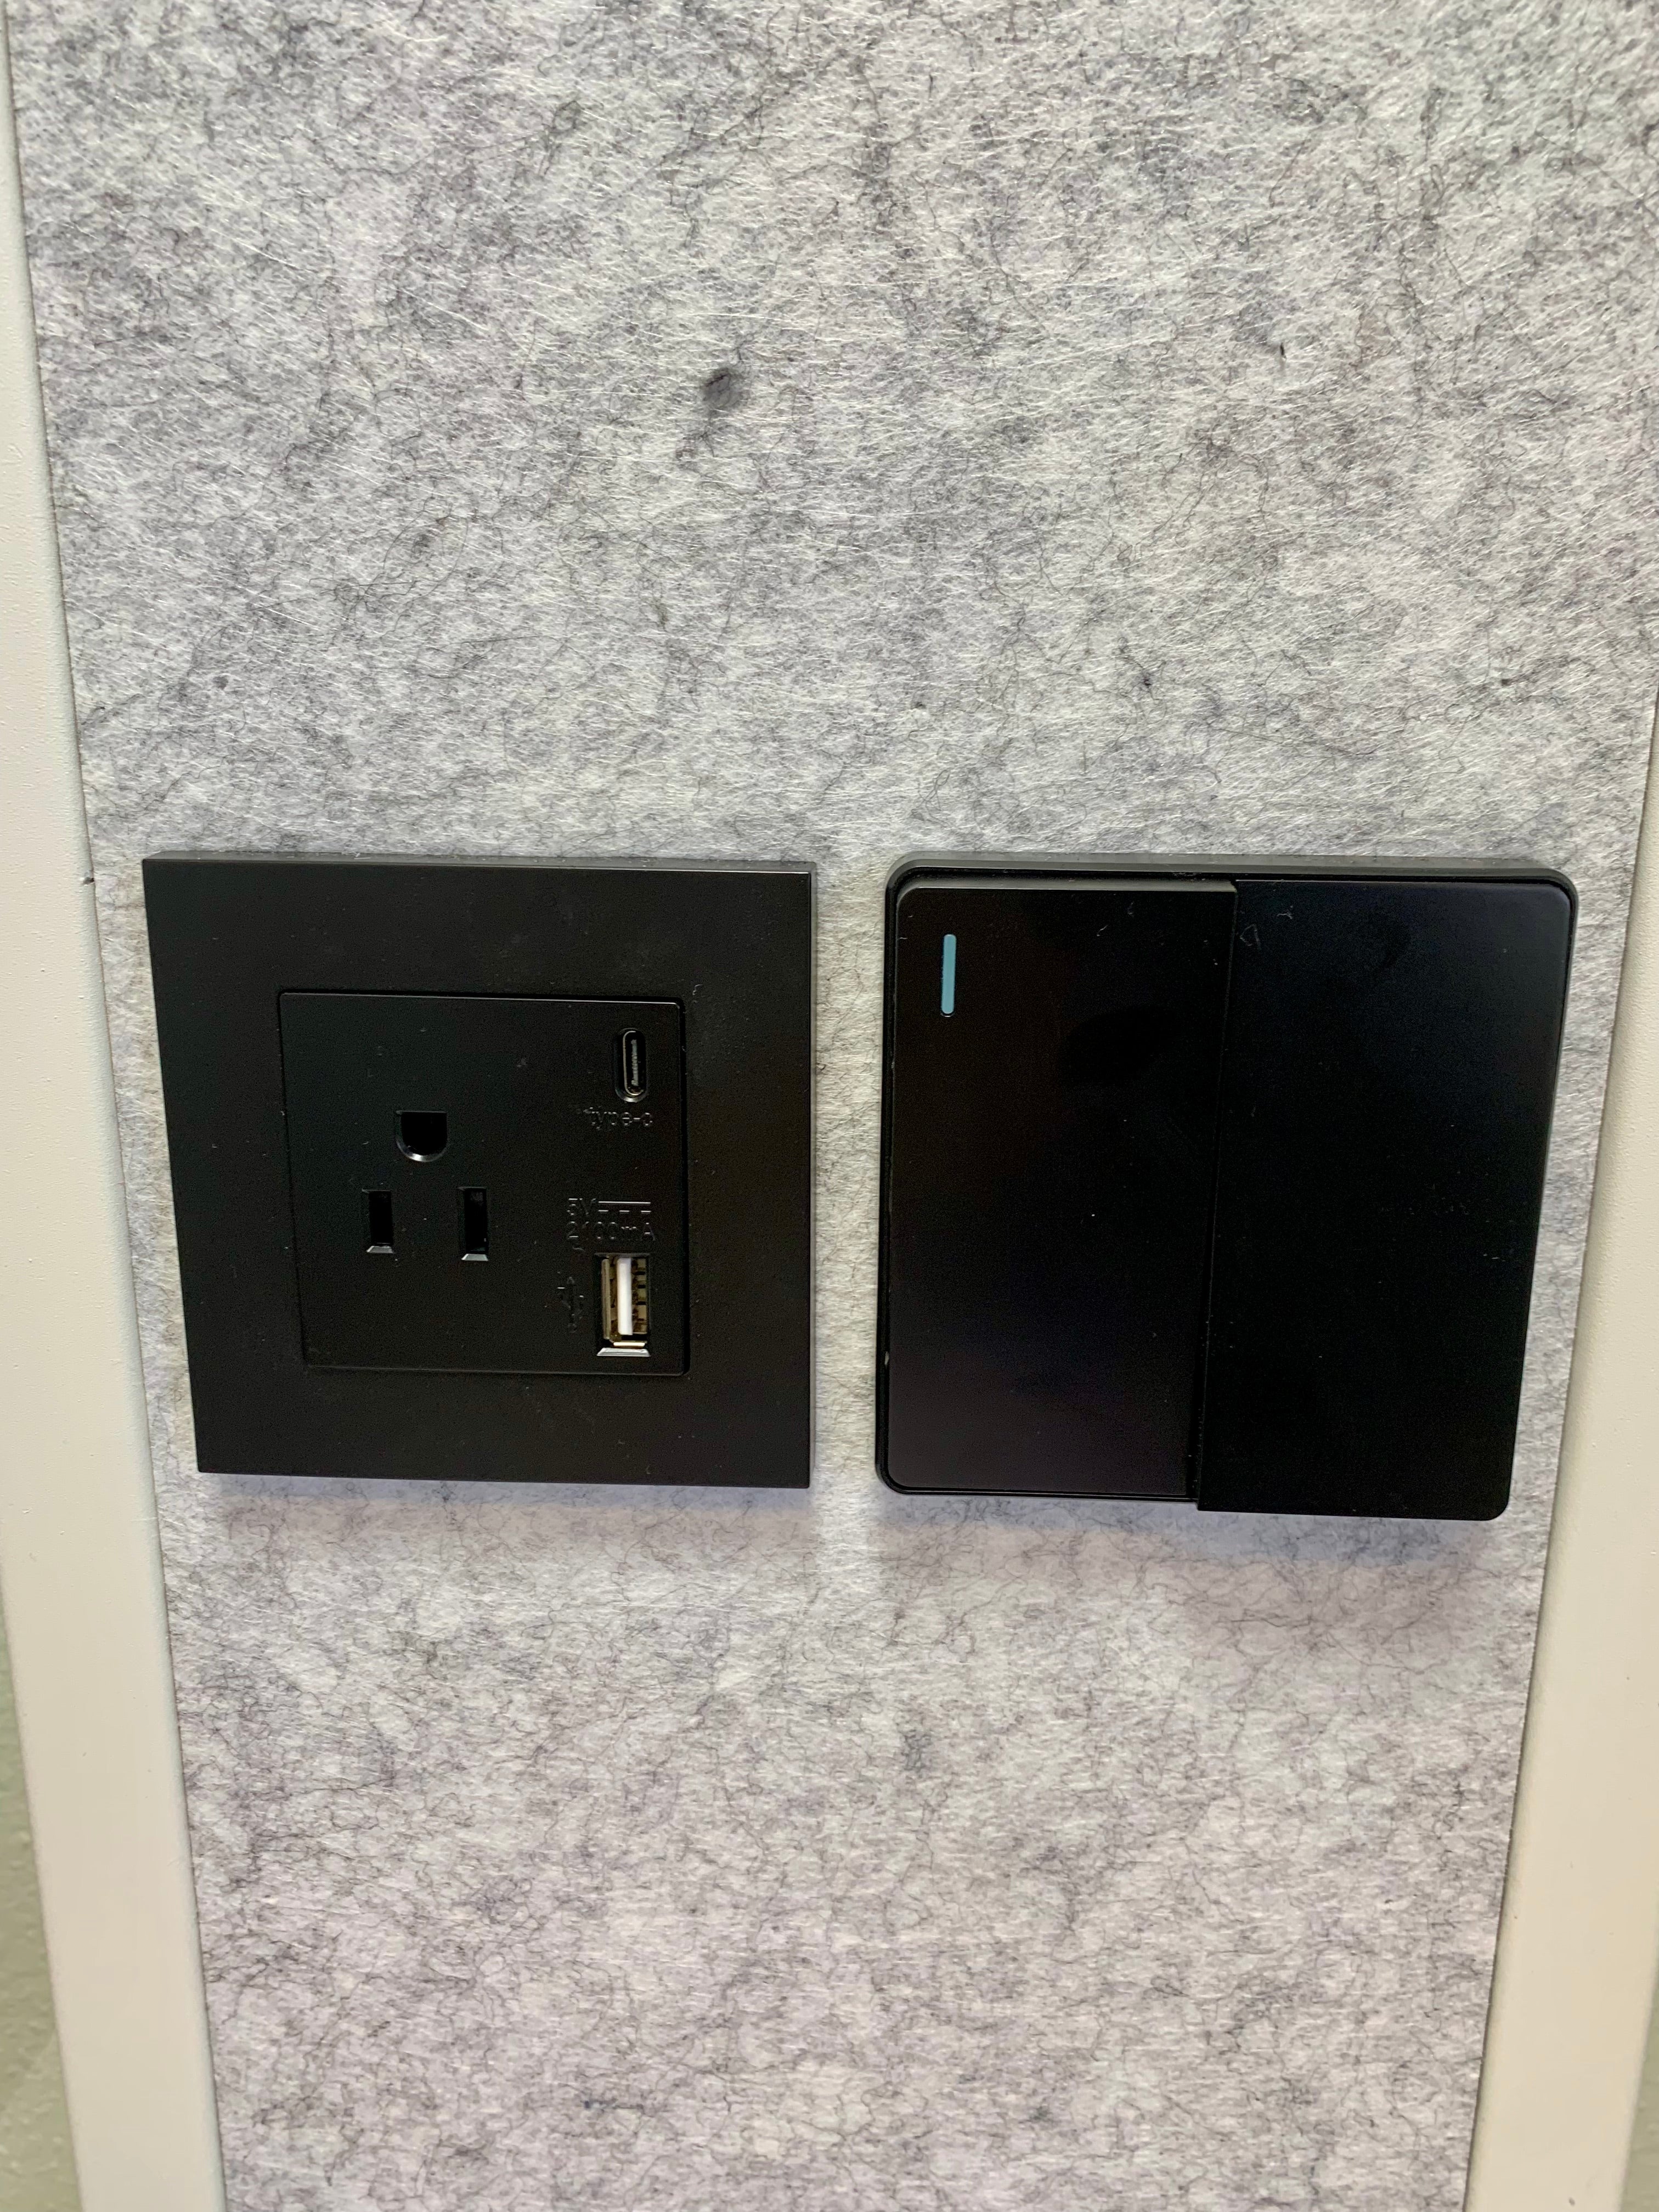 eBooth soundproof office phone booth outlets, light and fan switch